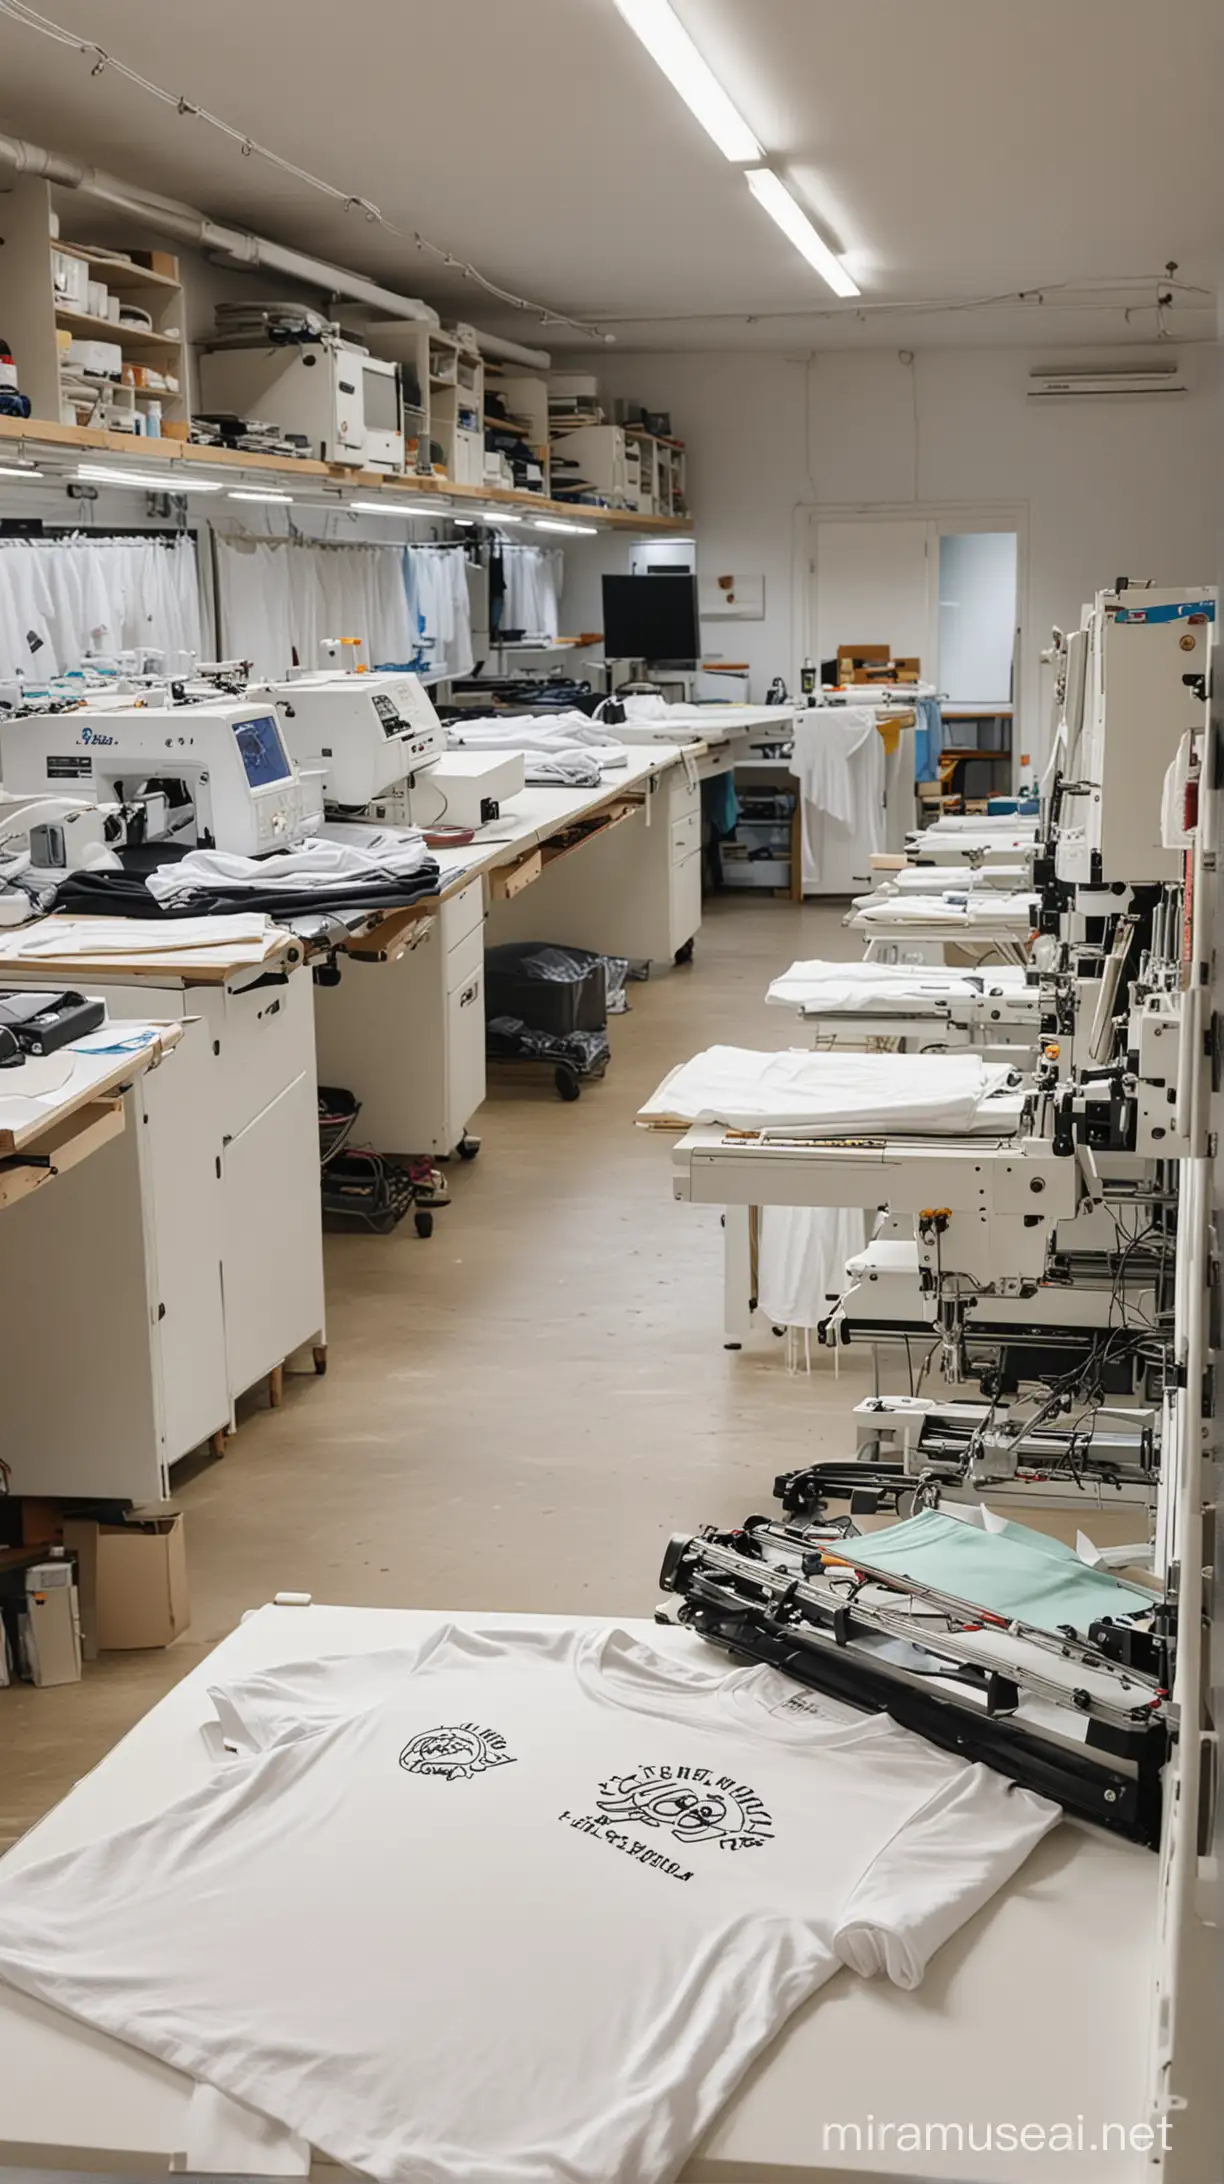 a photograph of a home embroidery and t-shirt print workshop. There are a couple of embroidery machines and a DTG printer making t-shirts. The workshop is in a spare room with no people in the image